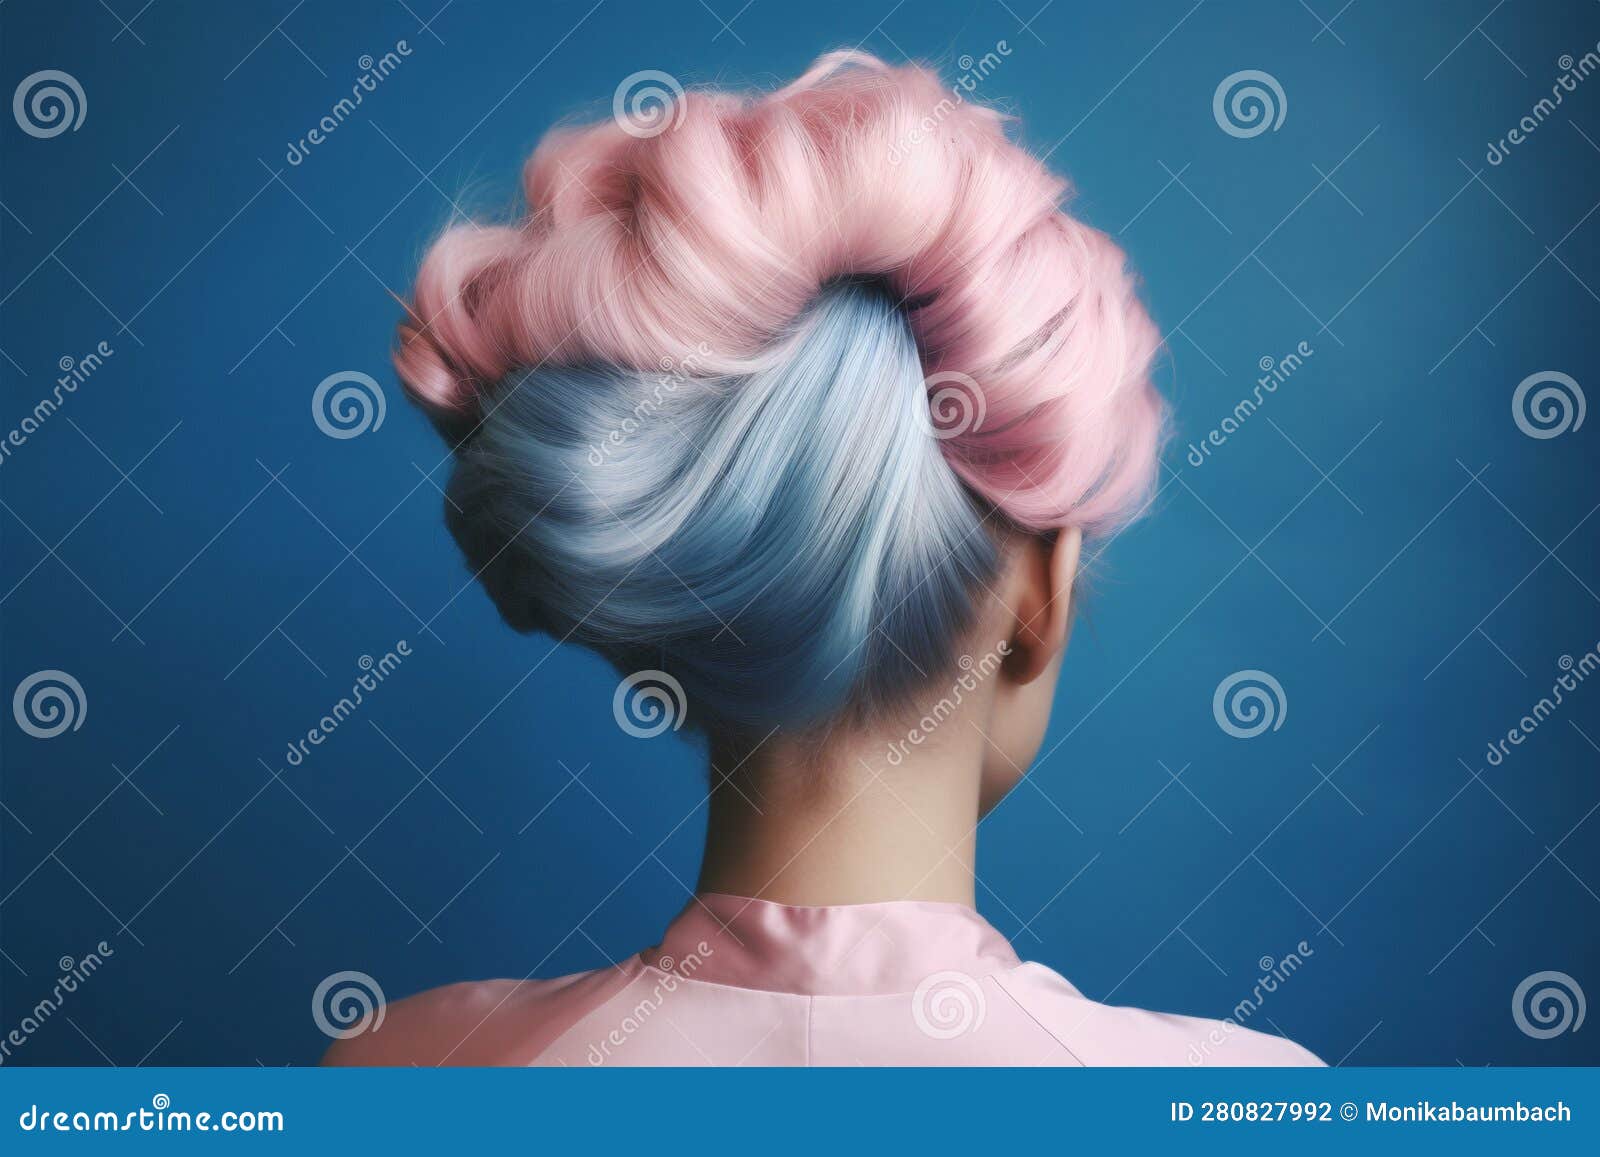 4. "Pink and Blue Hair Tutorial for Beginners: Easy Techniques for a Bold and Beautiful Look" - wide 1